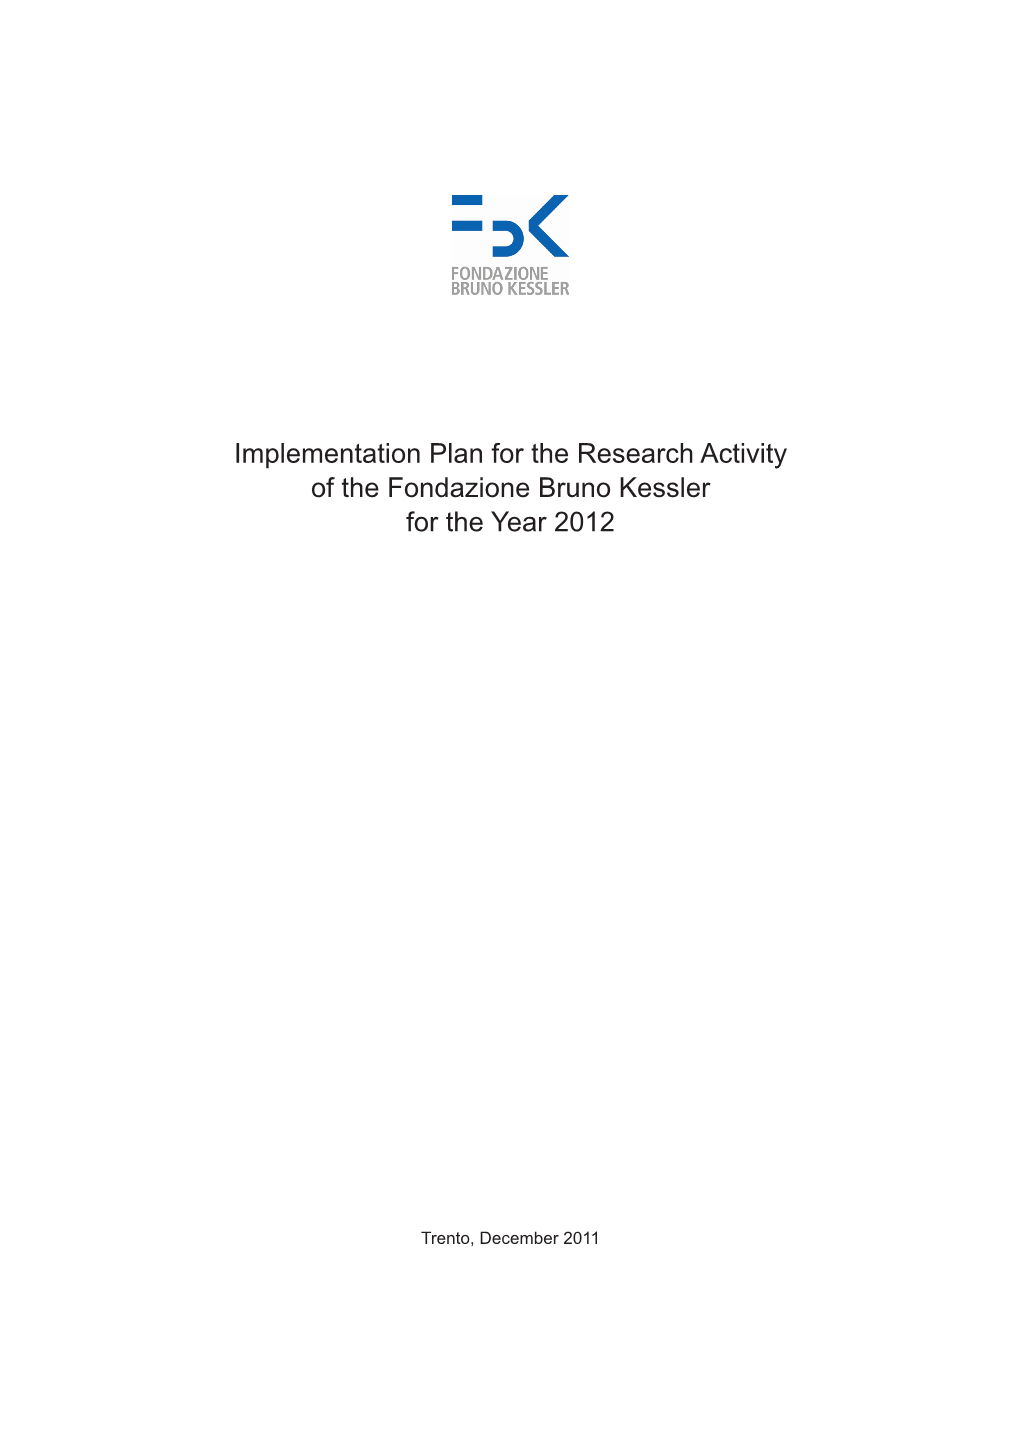 Implementation Plan for the Research Activity of the Fondazione Bruno Kessler for the Year 2012